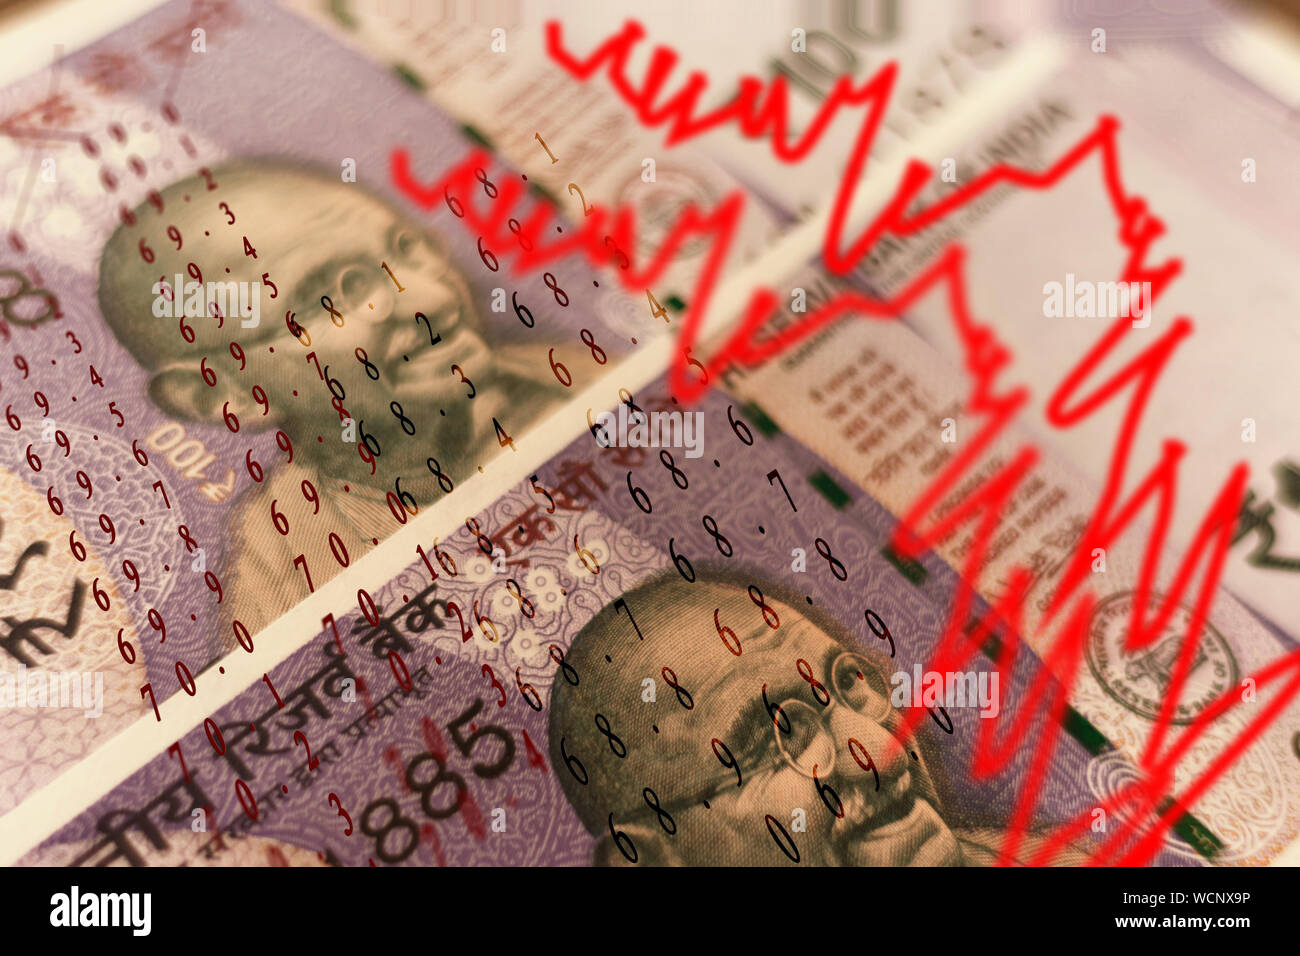 Concept of Economic slowdown showing with Indian currency notes, graphes and numbers Stock Photo